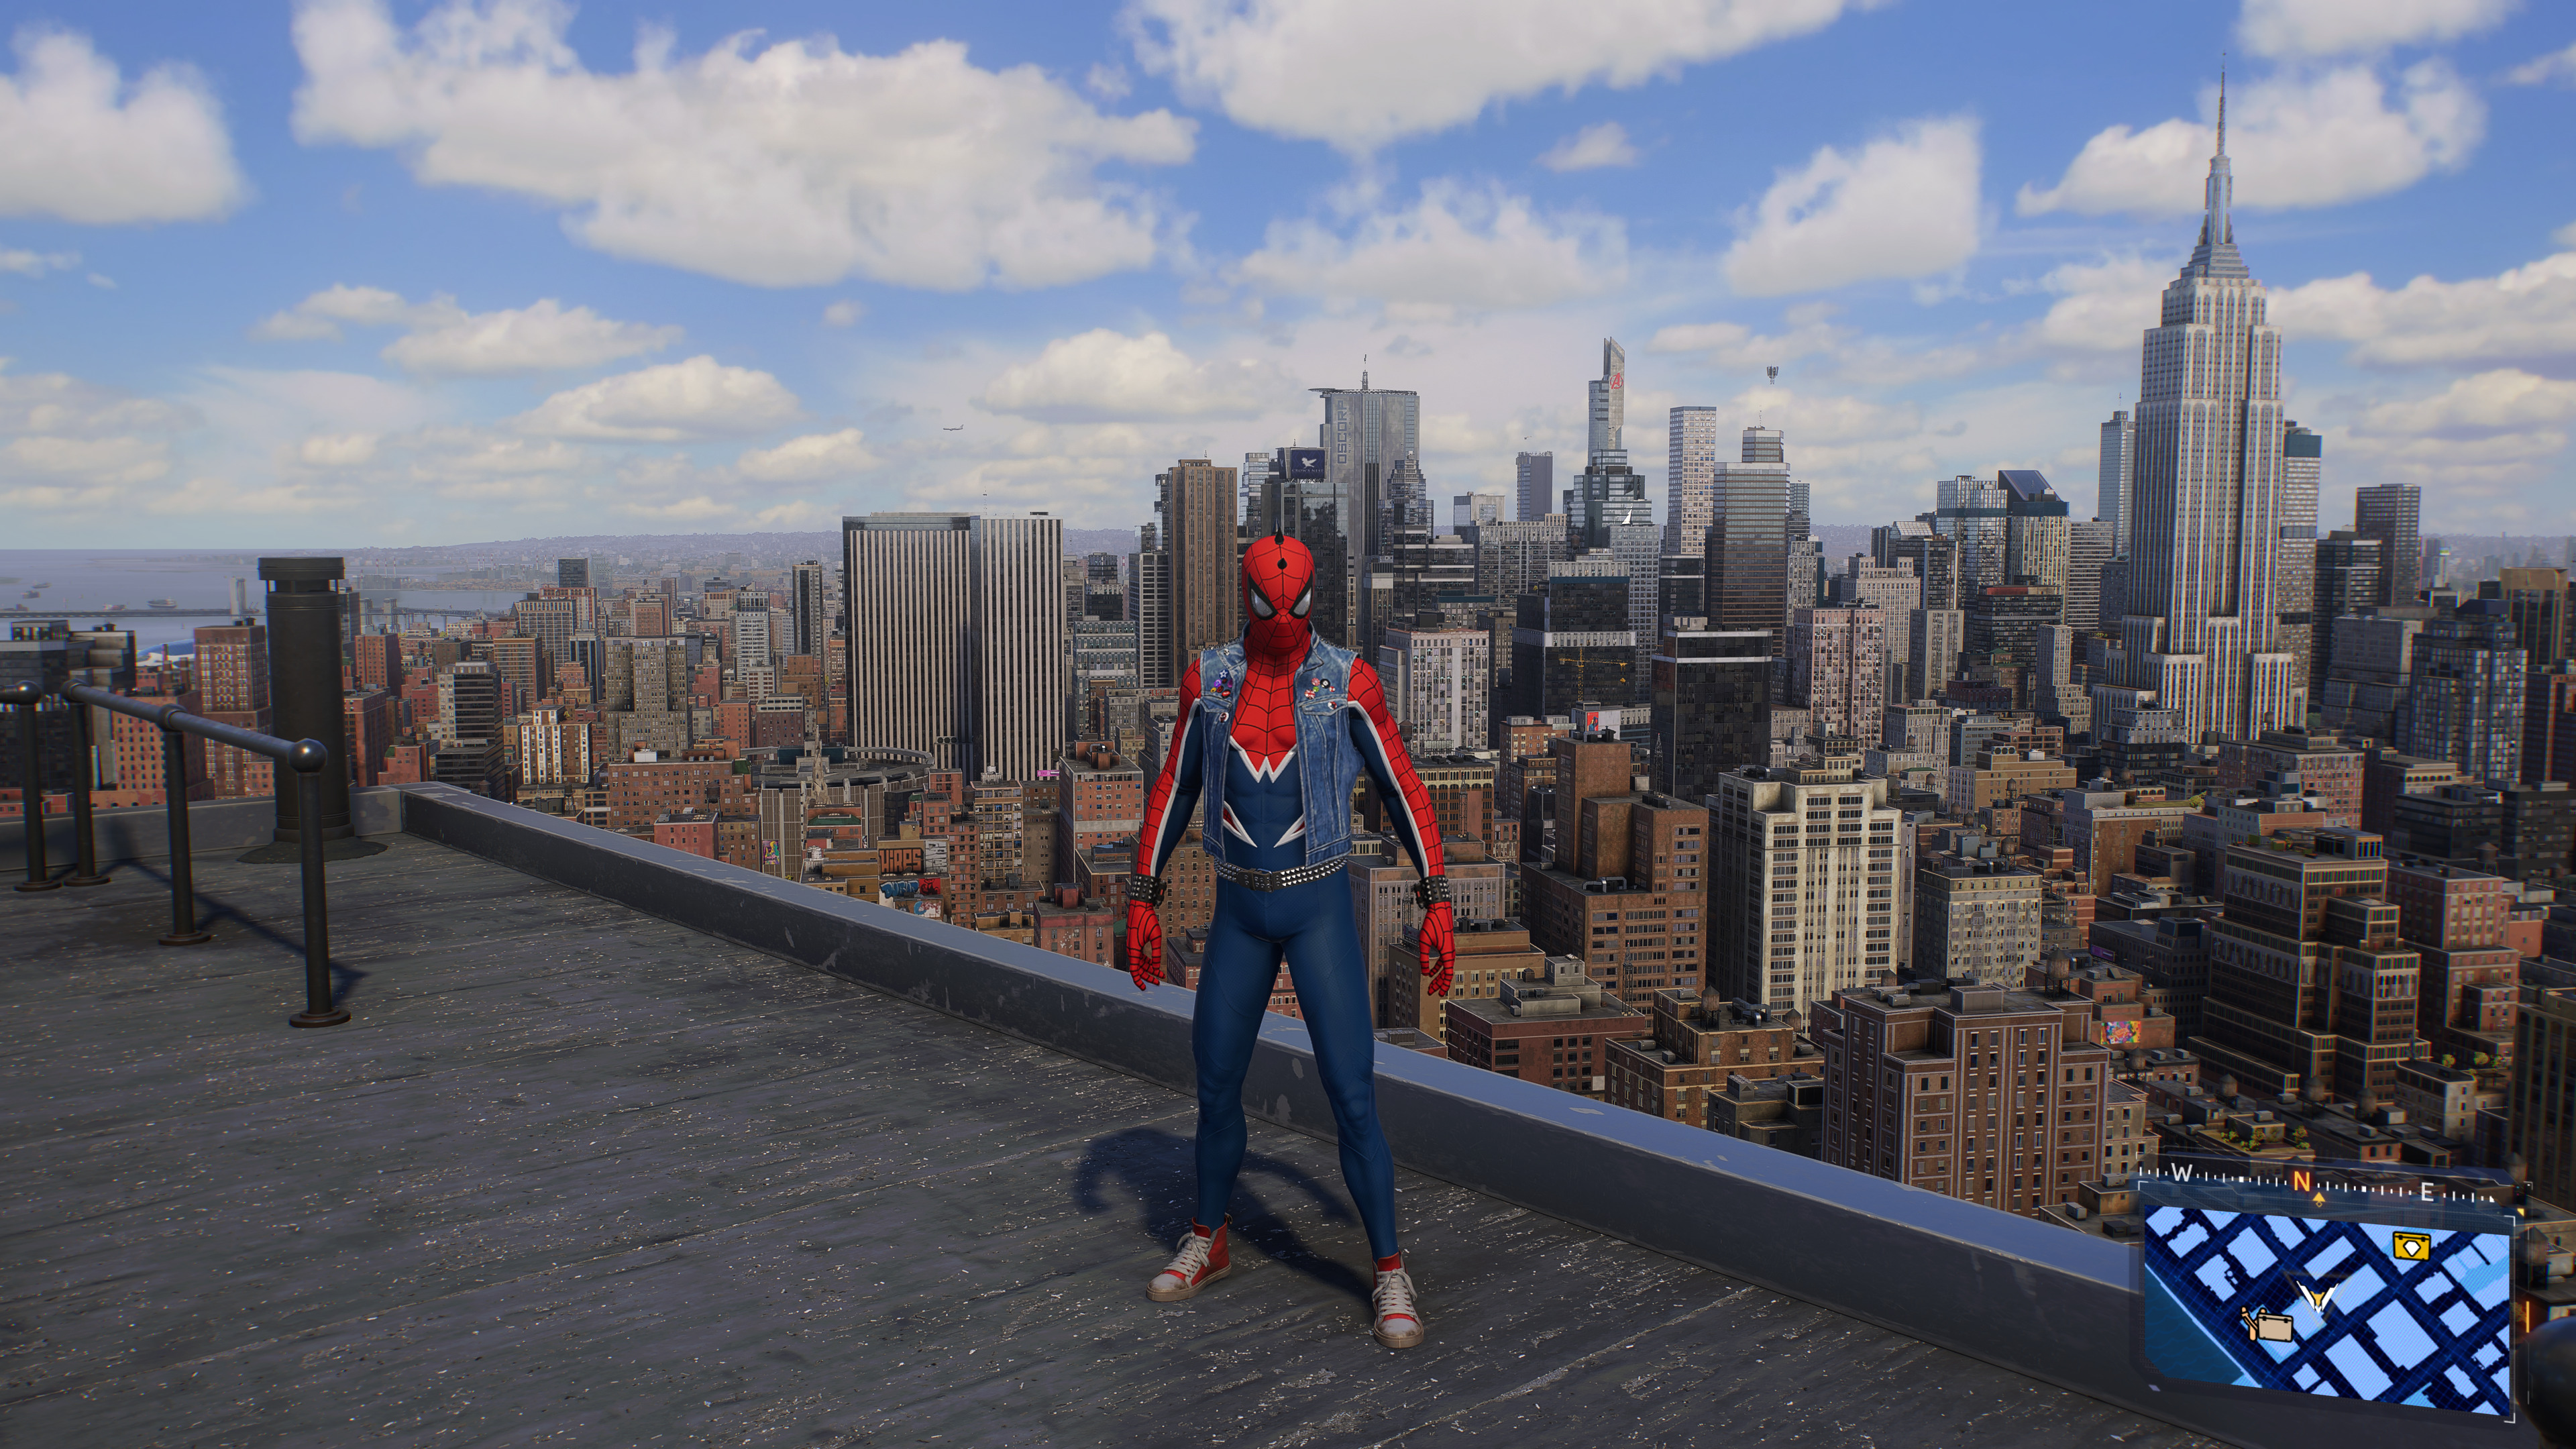 Spider-Man 2: How to unlock the Spider-Punk Suit